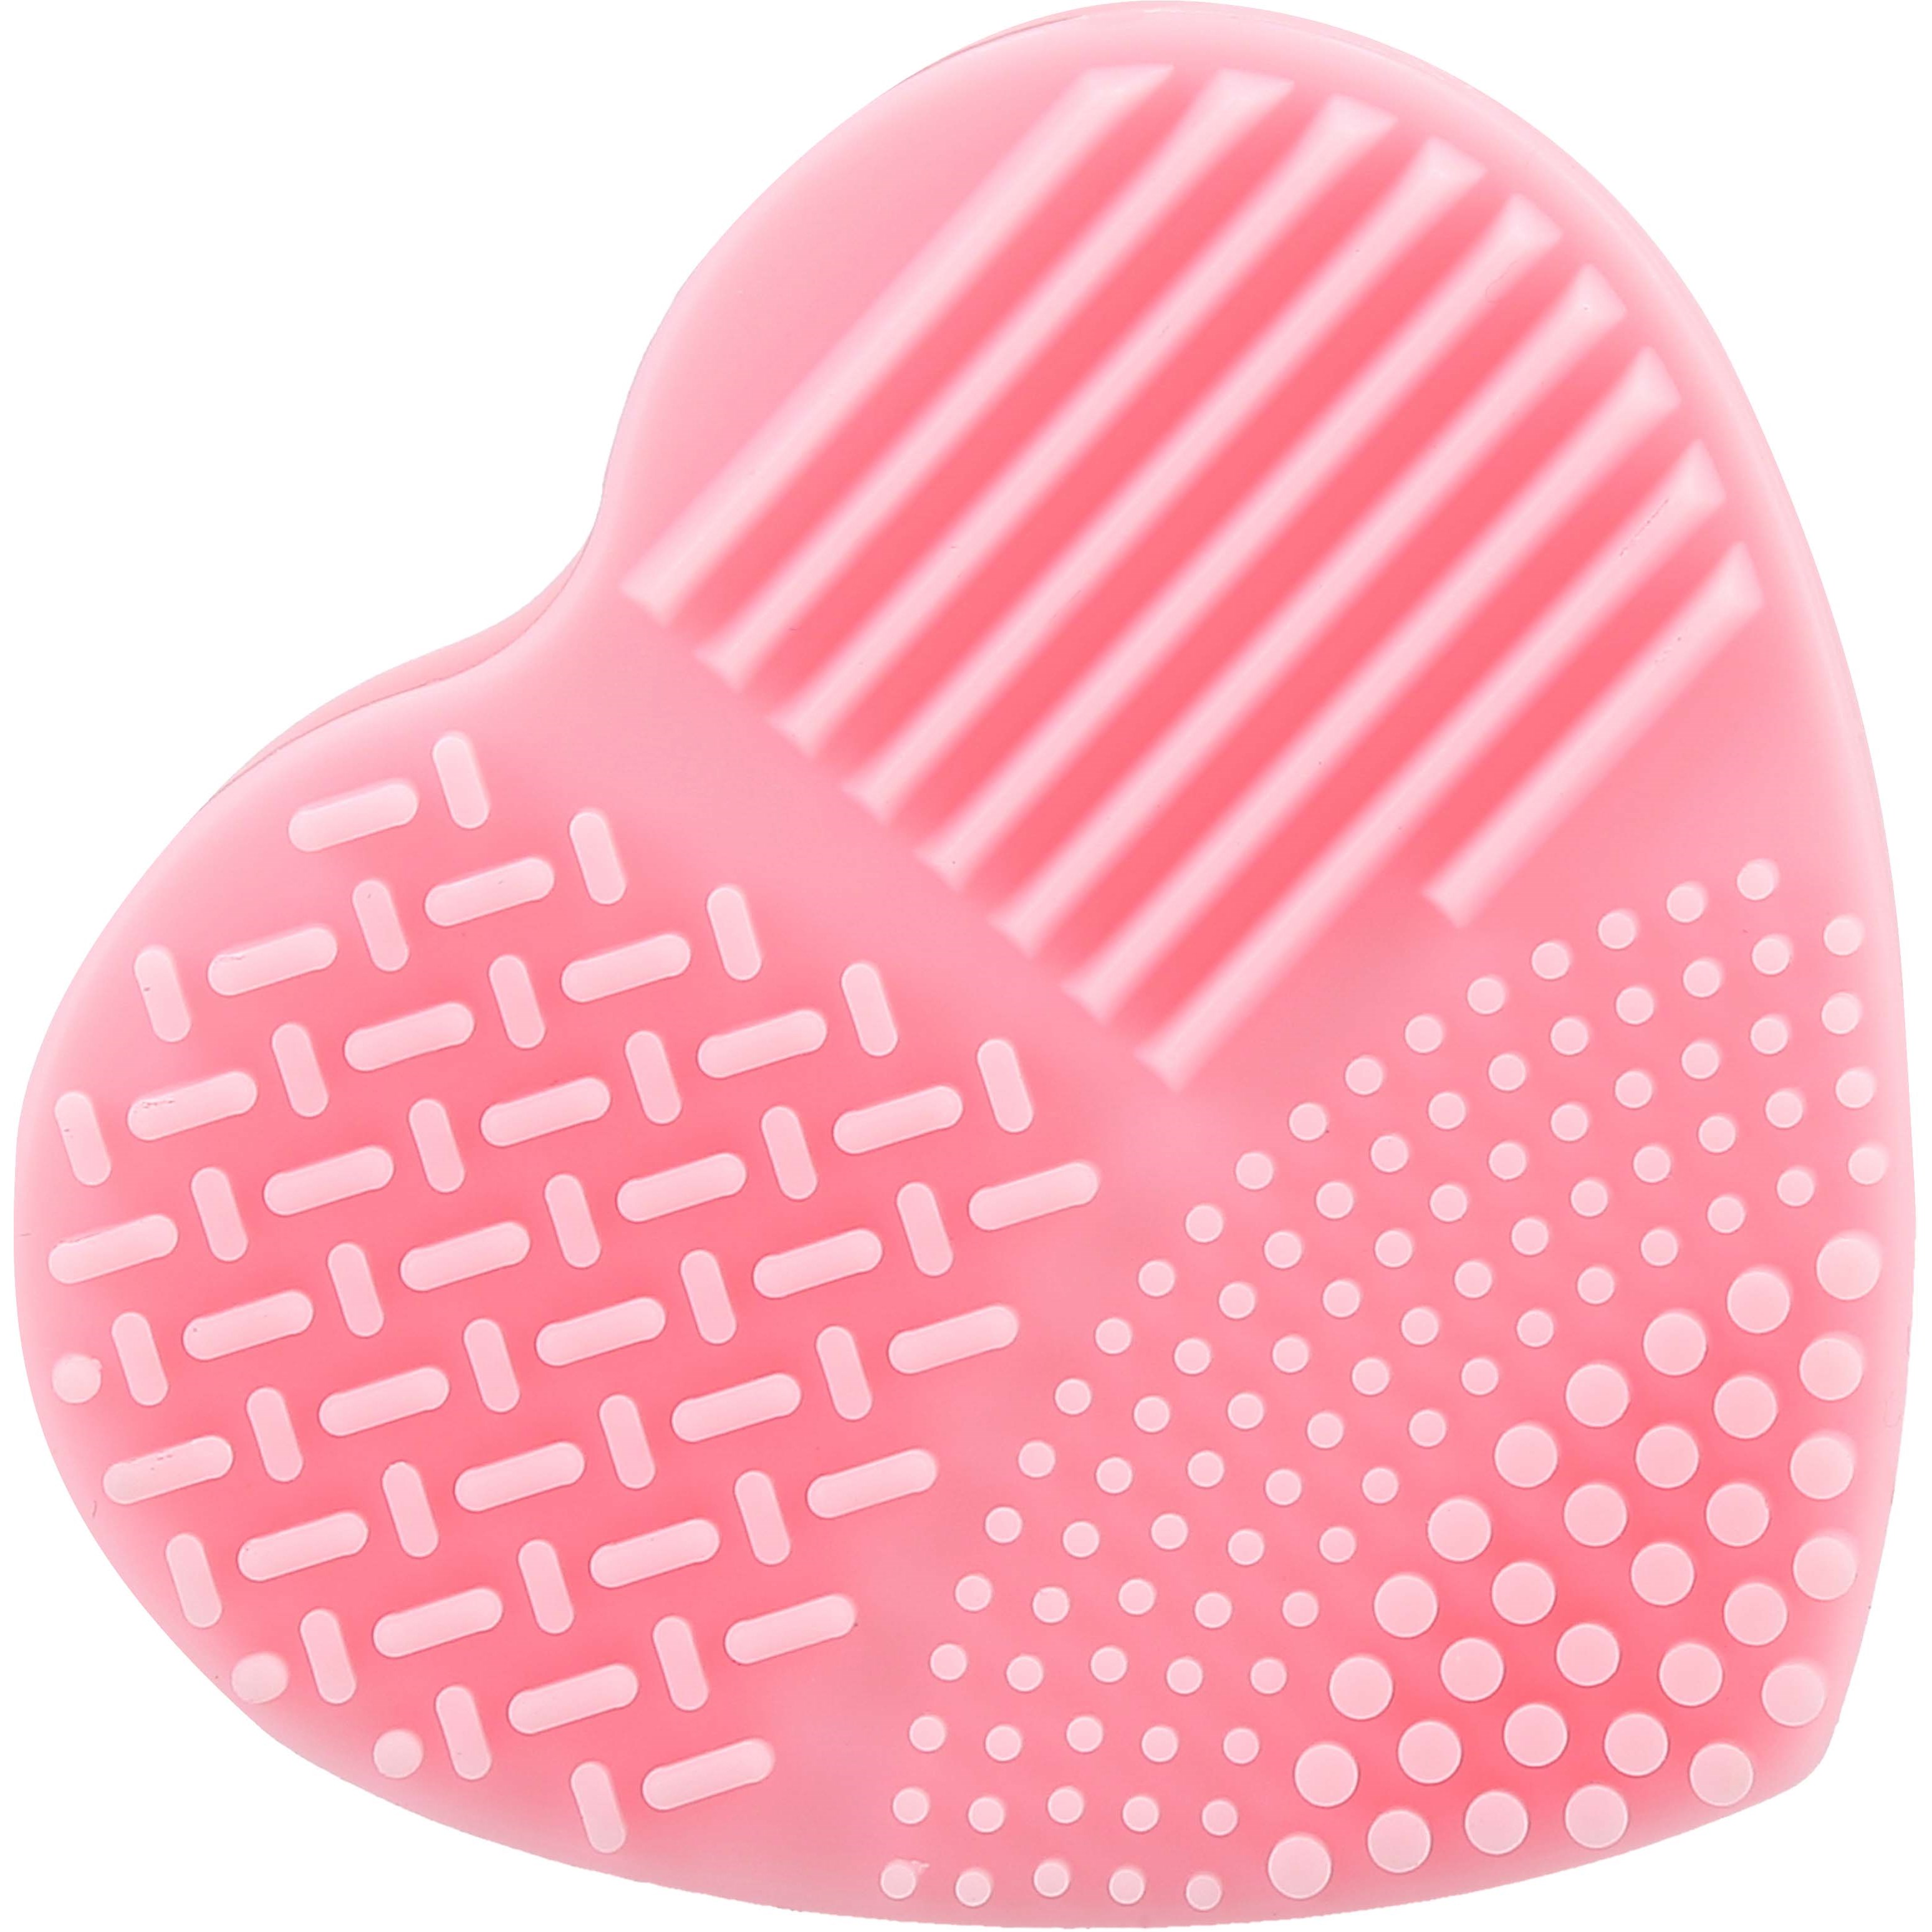 STYLPRO Makeup Brush Cleaner And Dryer Gift Set Cheetah